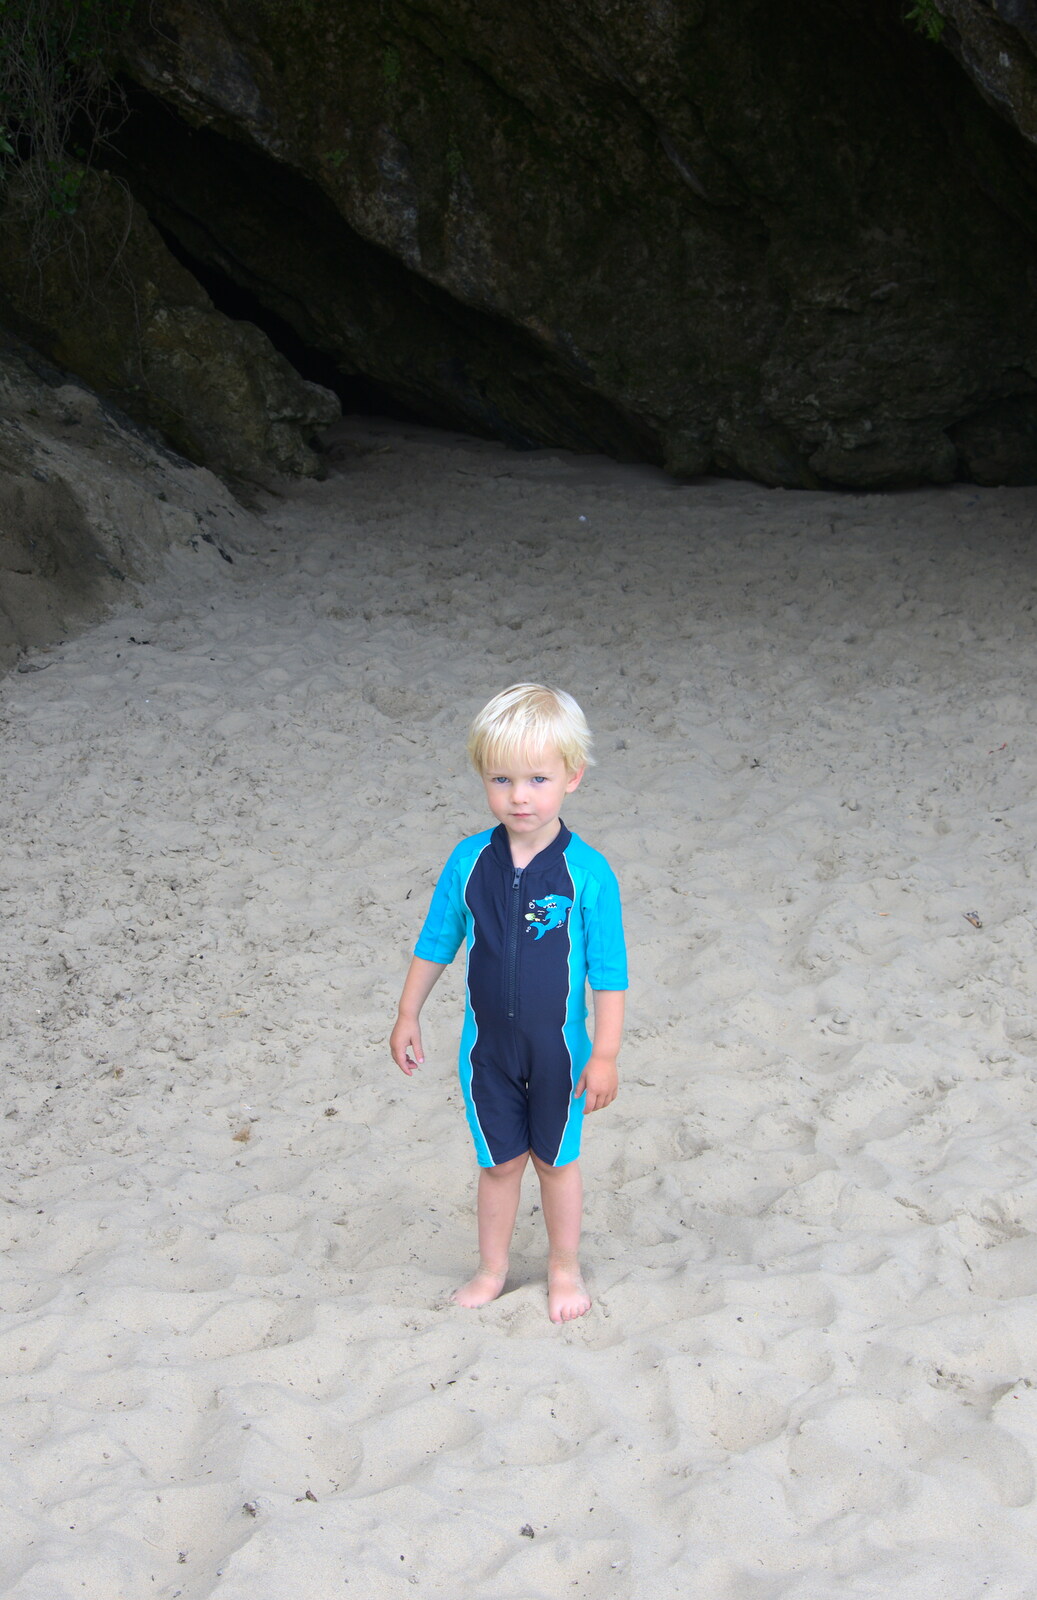 Harry stands around near the cave from Camping at Silver Strand, Wicklow, County Wicklow, Ireland - 7th August 2014